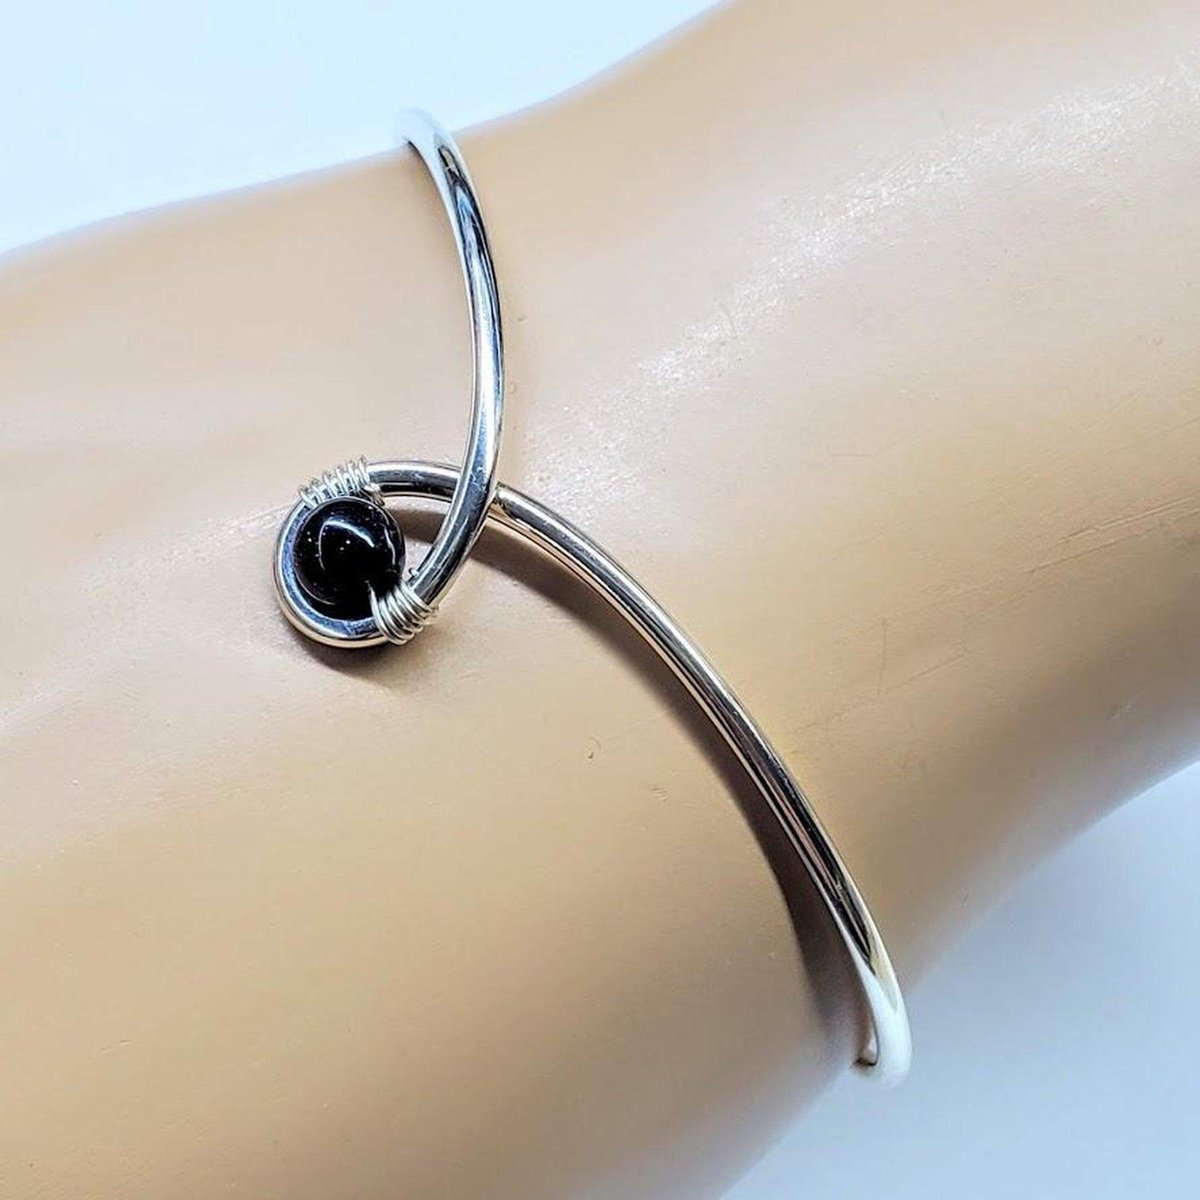 Child Abuse Awareness Teardrop Bangle with Blue Sandstone Bead - Handcrafted Sterling Silver Design with Unique Sparkle Bijou Her